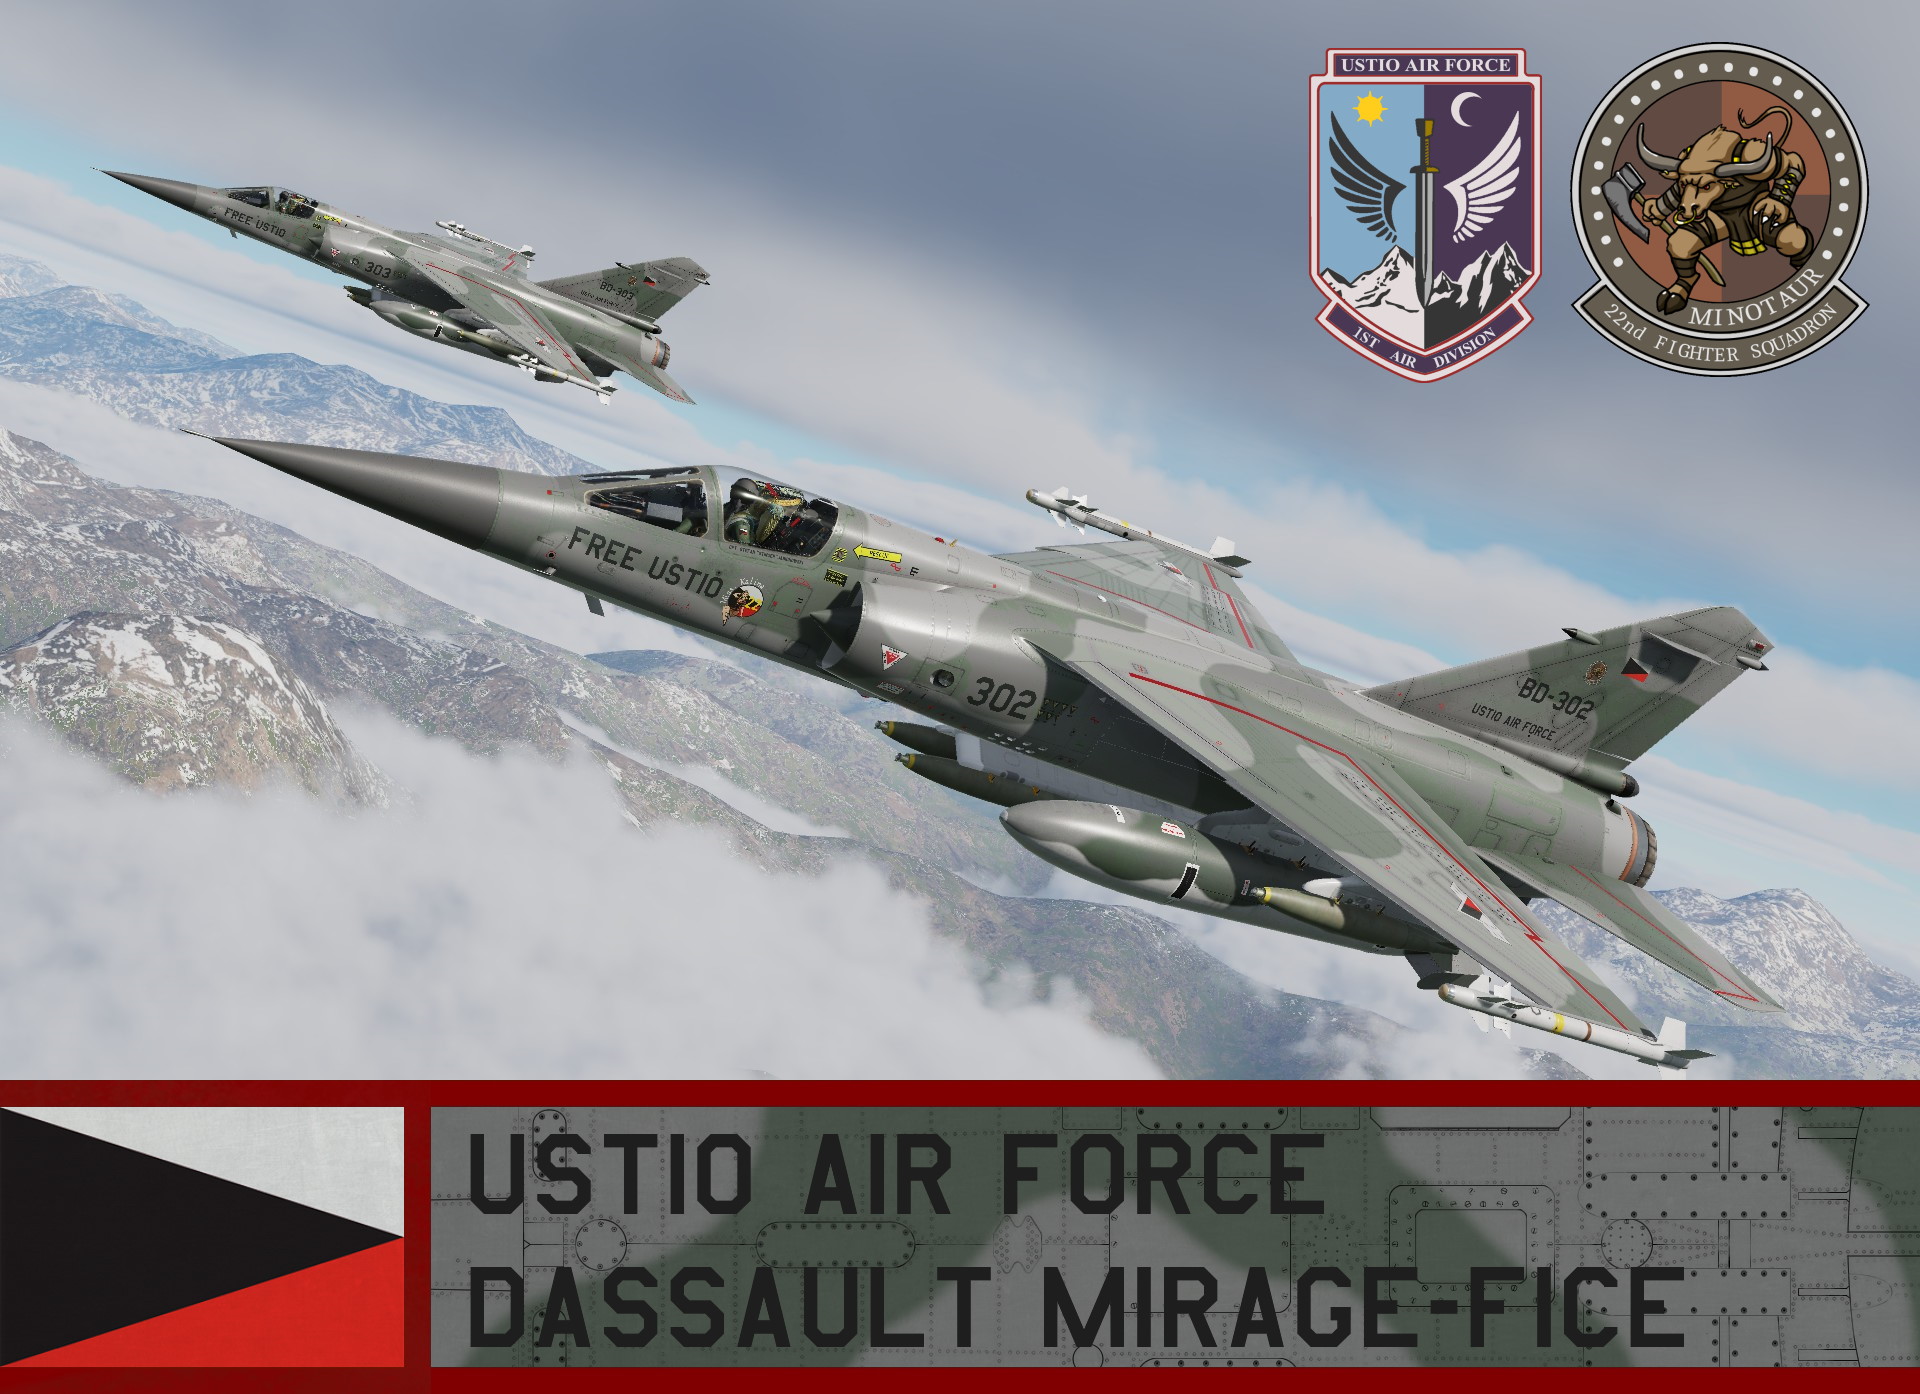 Ustio Air Force Mirage-F1CE - Ace Combat ( 1st Air Division, 22nd Fighter Squadron)